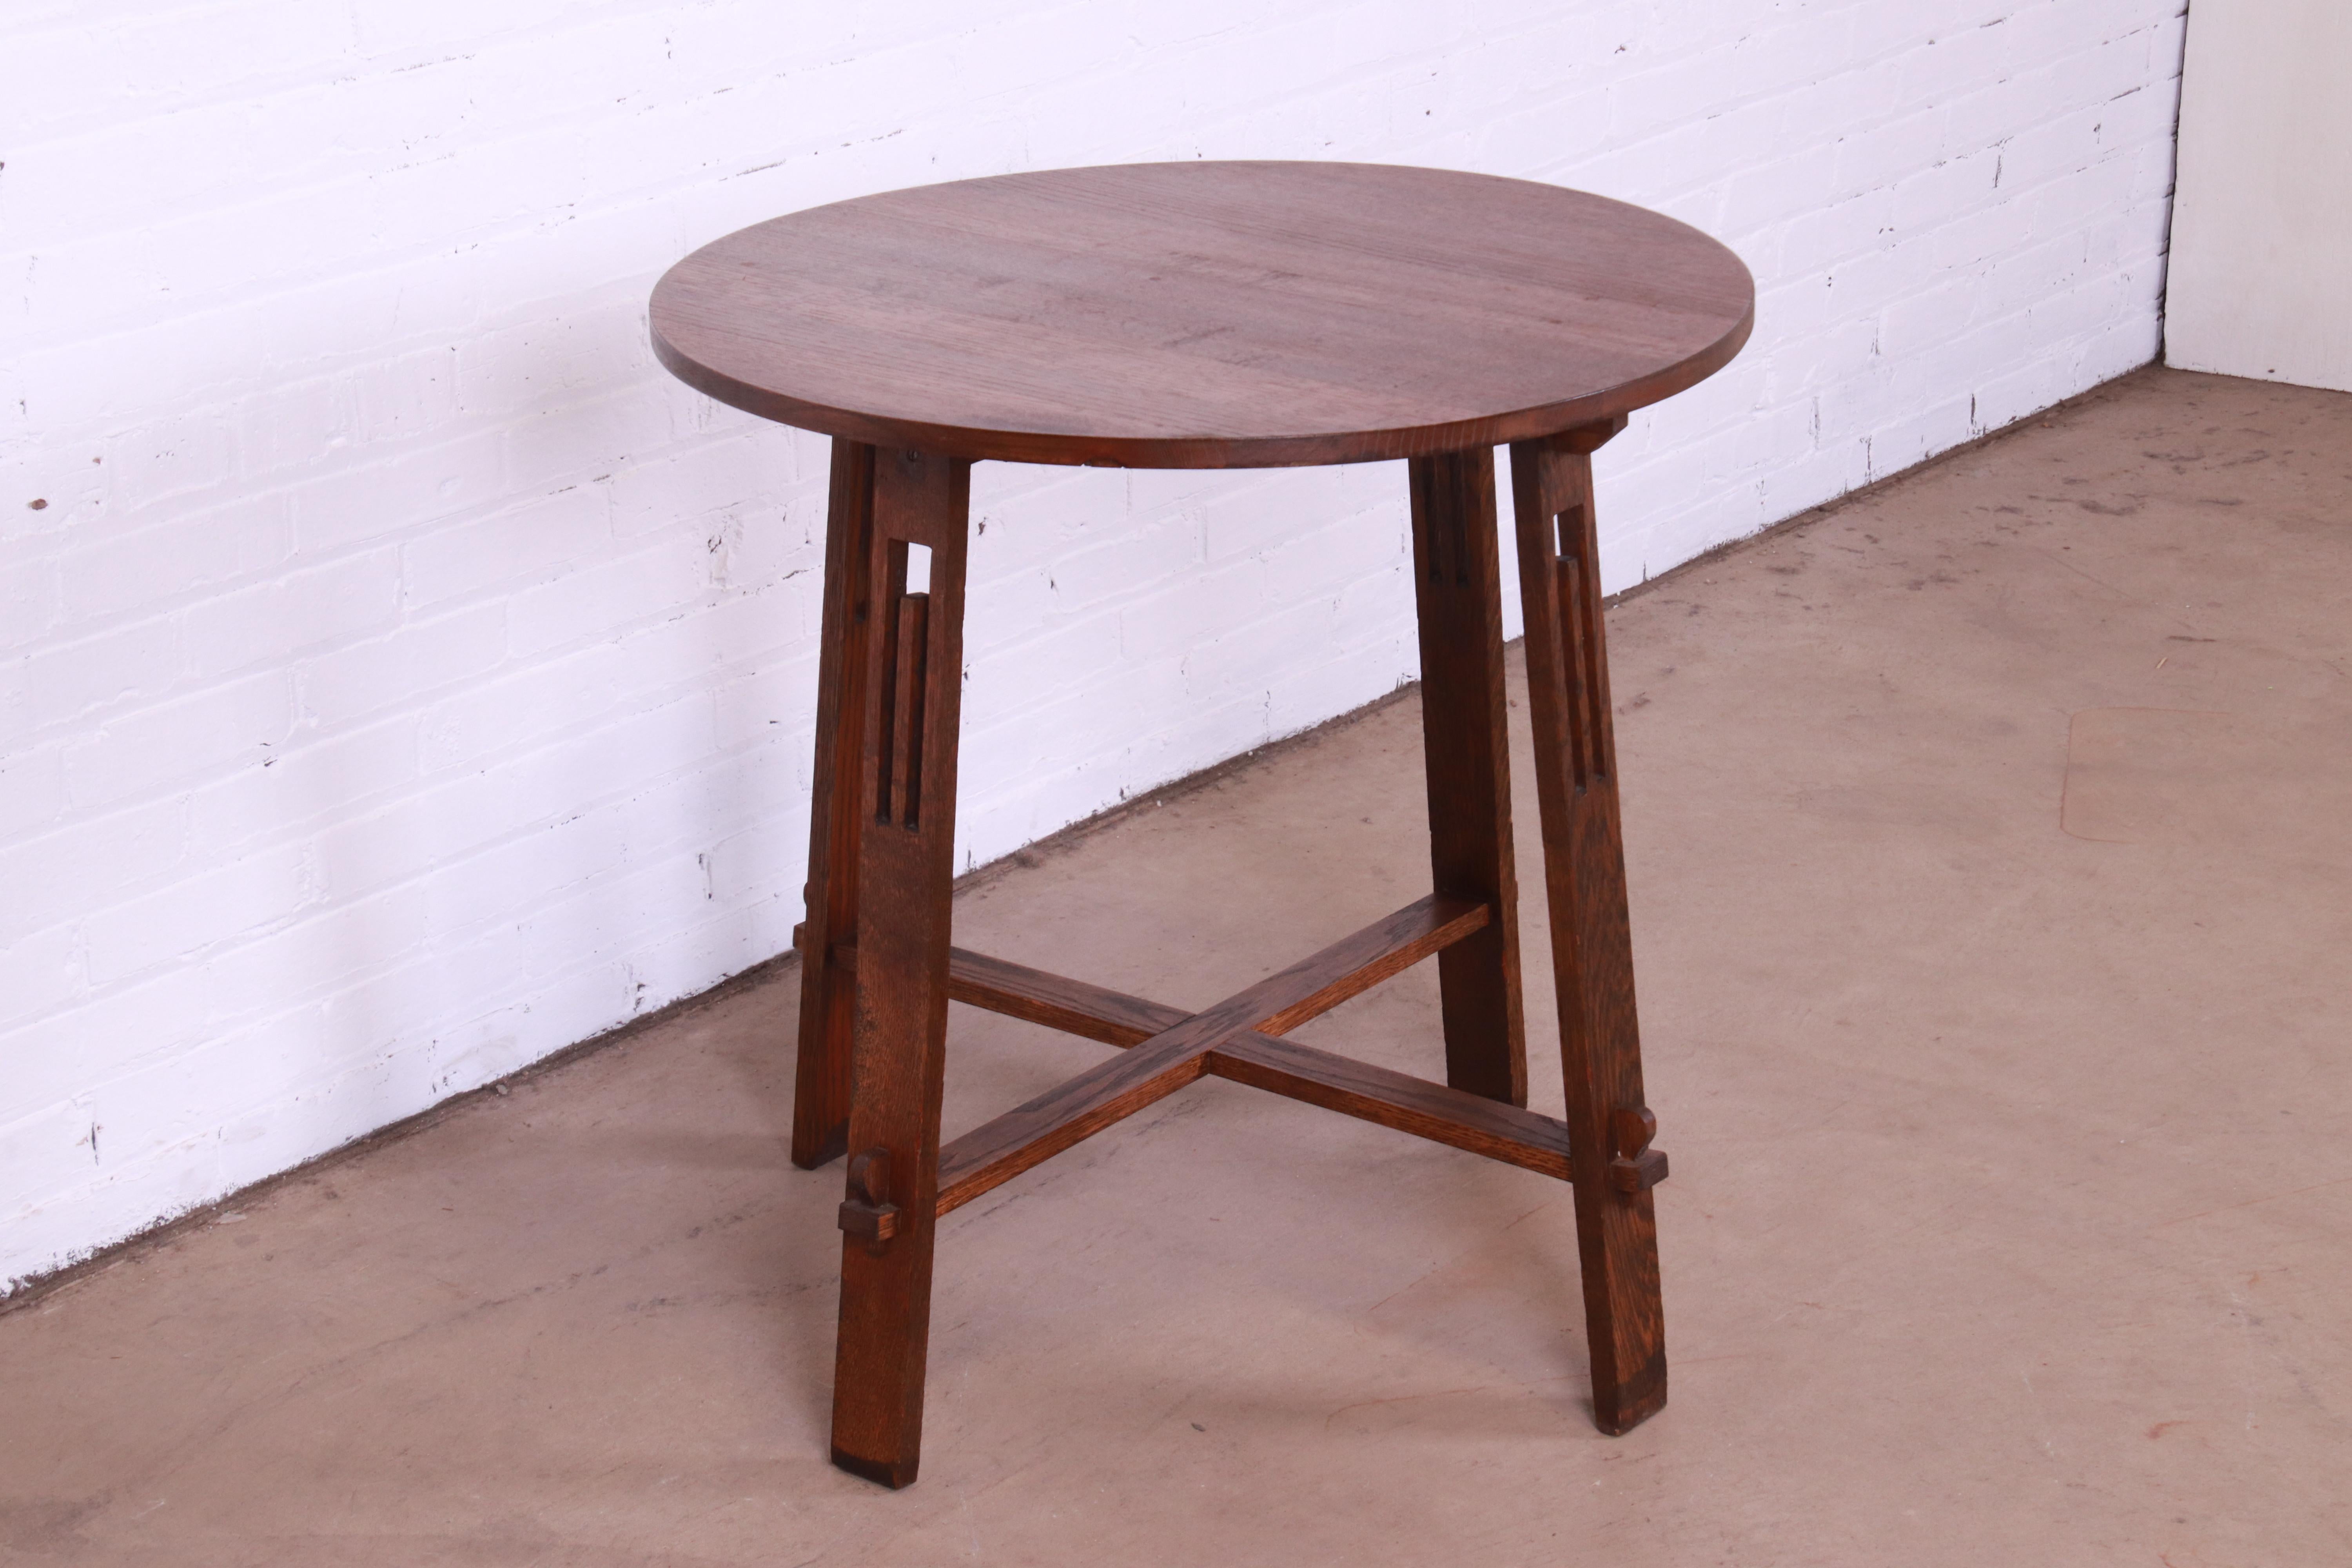 20th Century Antique Stickley Style Arts & Crafts Oak Side Table, Circa 1900